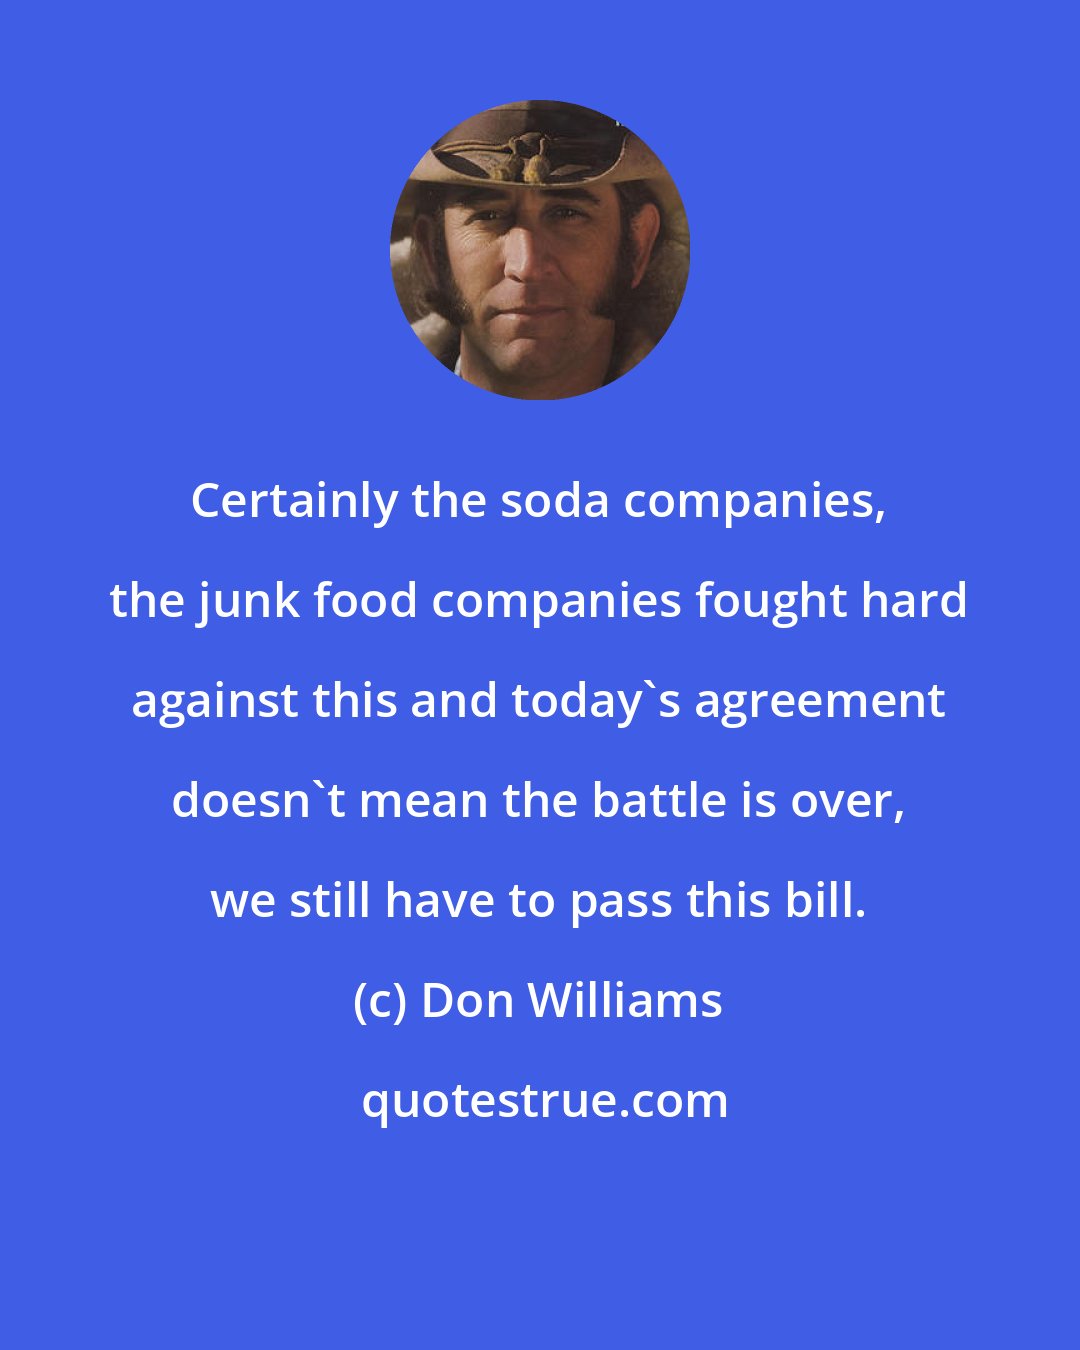 Don Williams: Certainly the soda companies, the junk food companies fought hard against this and today's agreement doesn't mean the battle is over, we still have to pass this bill.